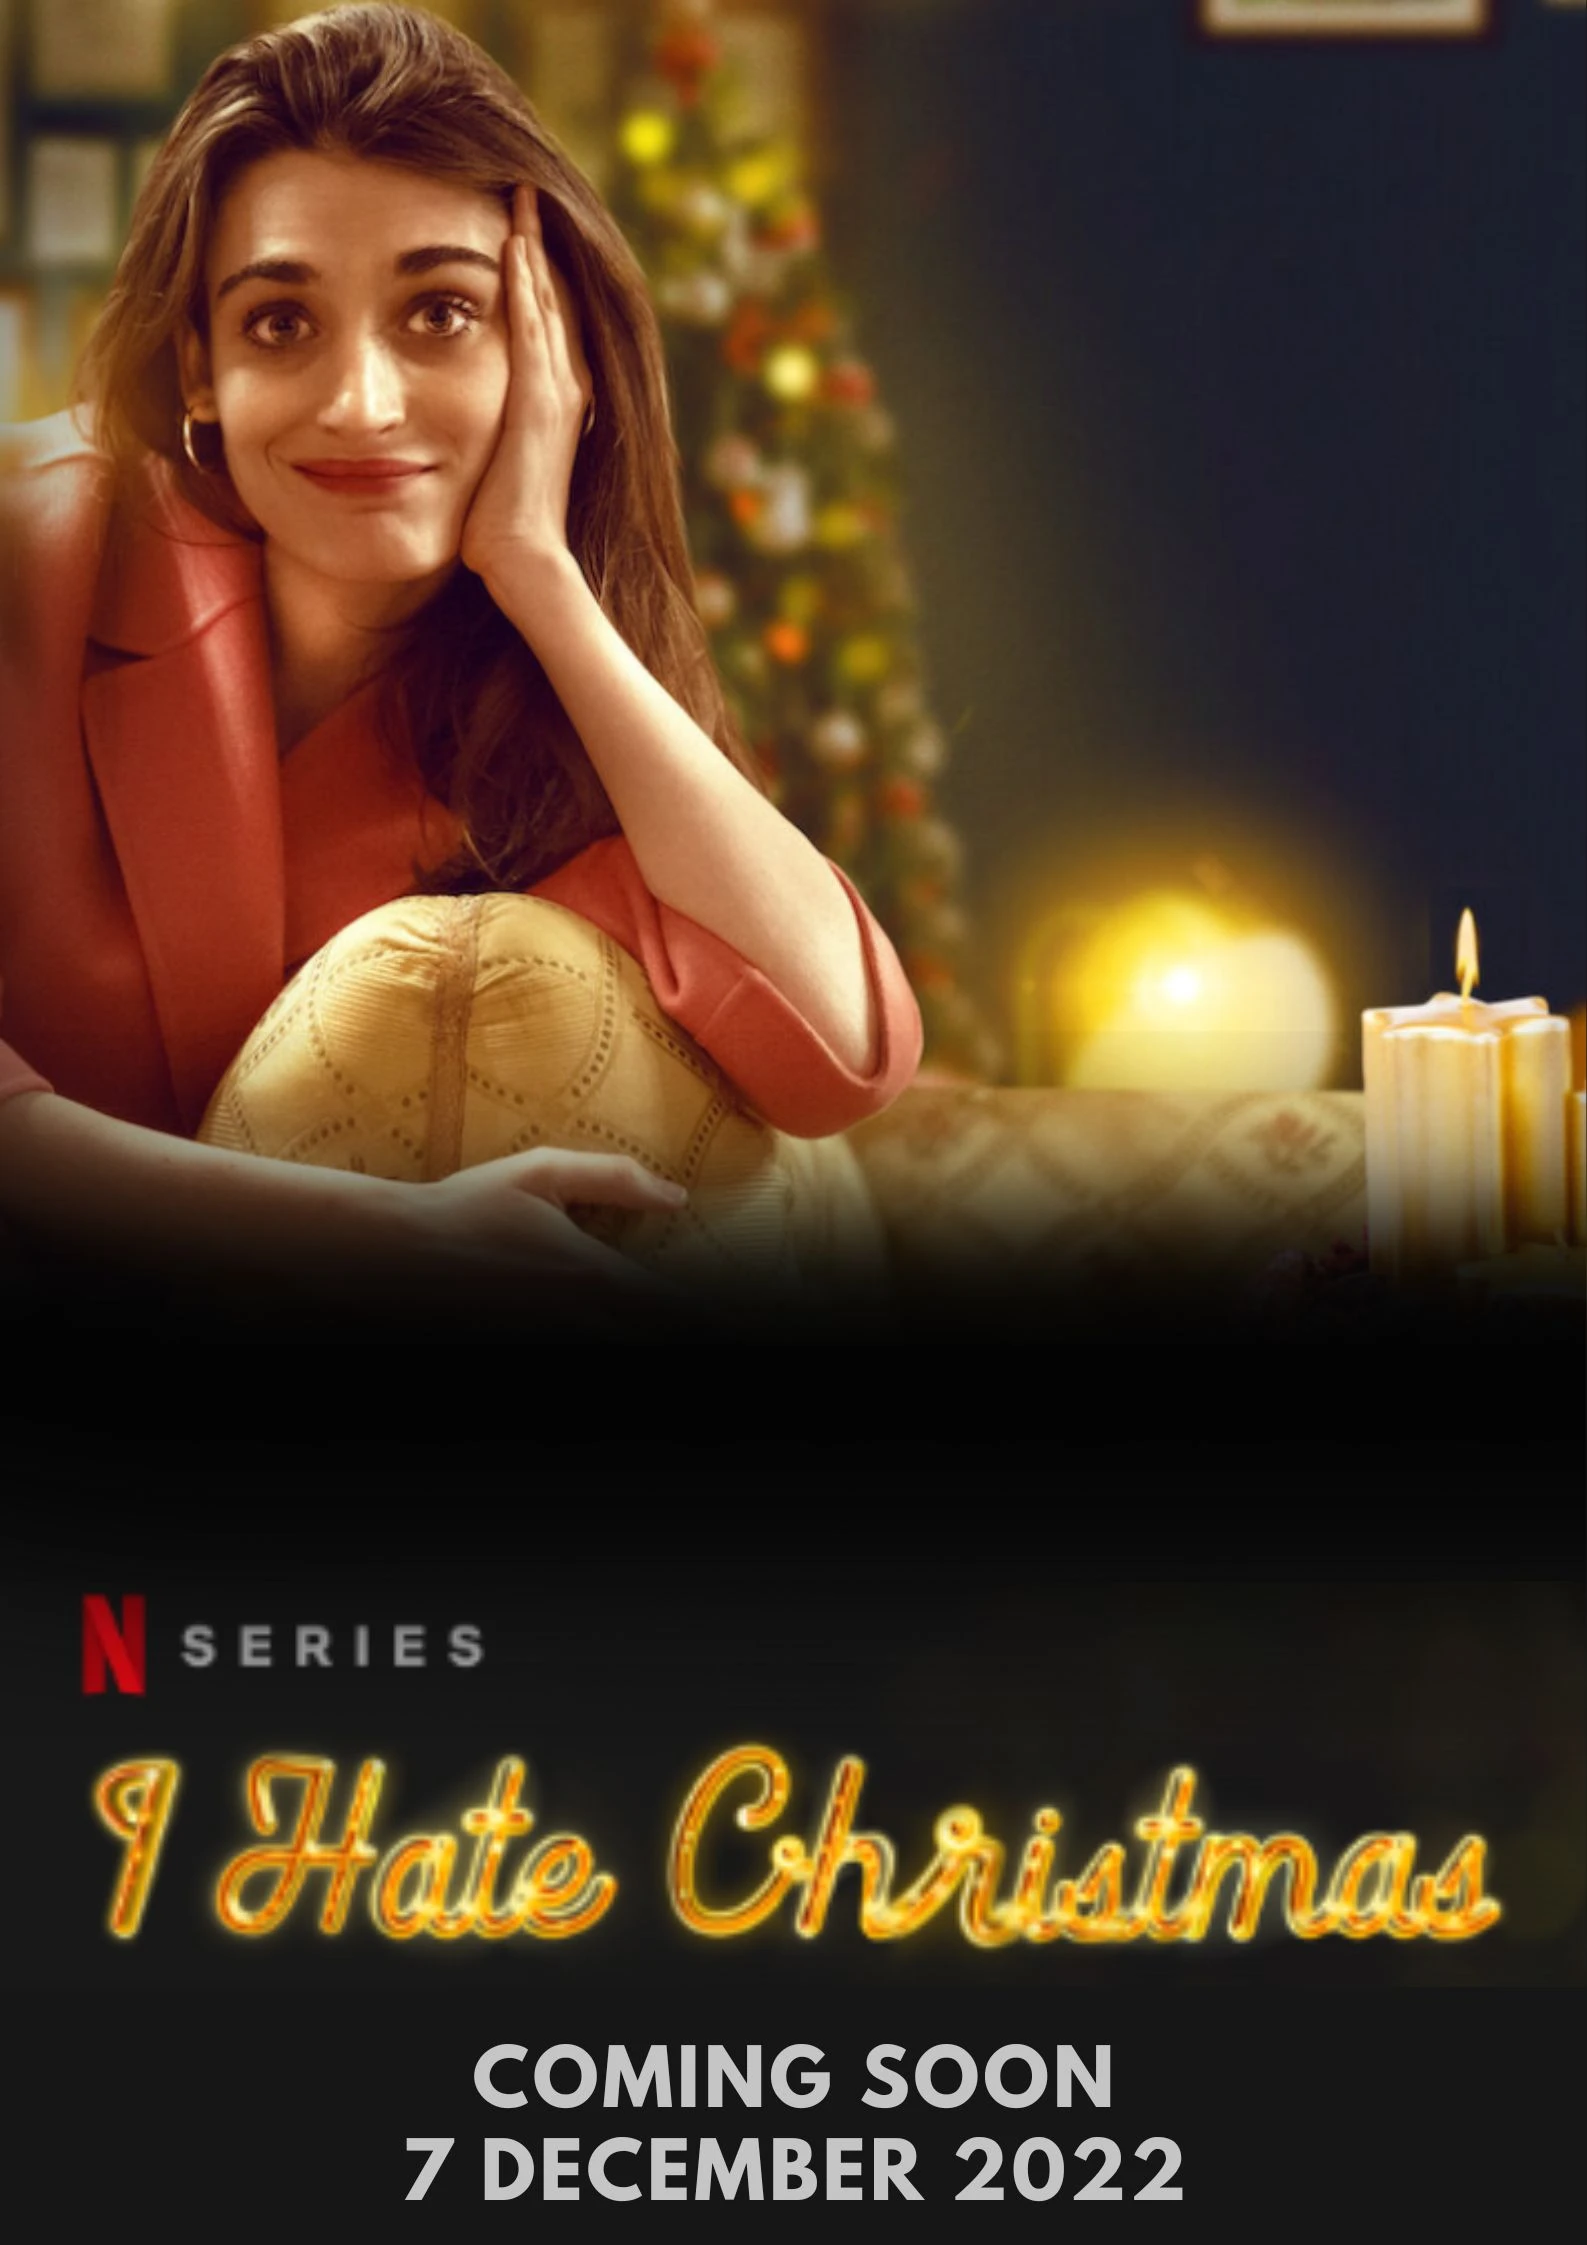 I Hate Christmas Parents Guide and Age Rating (2022)